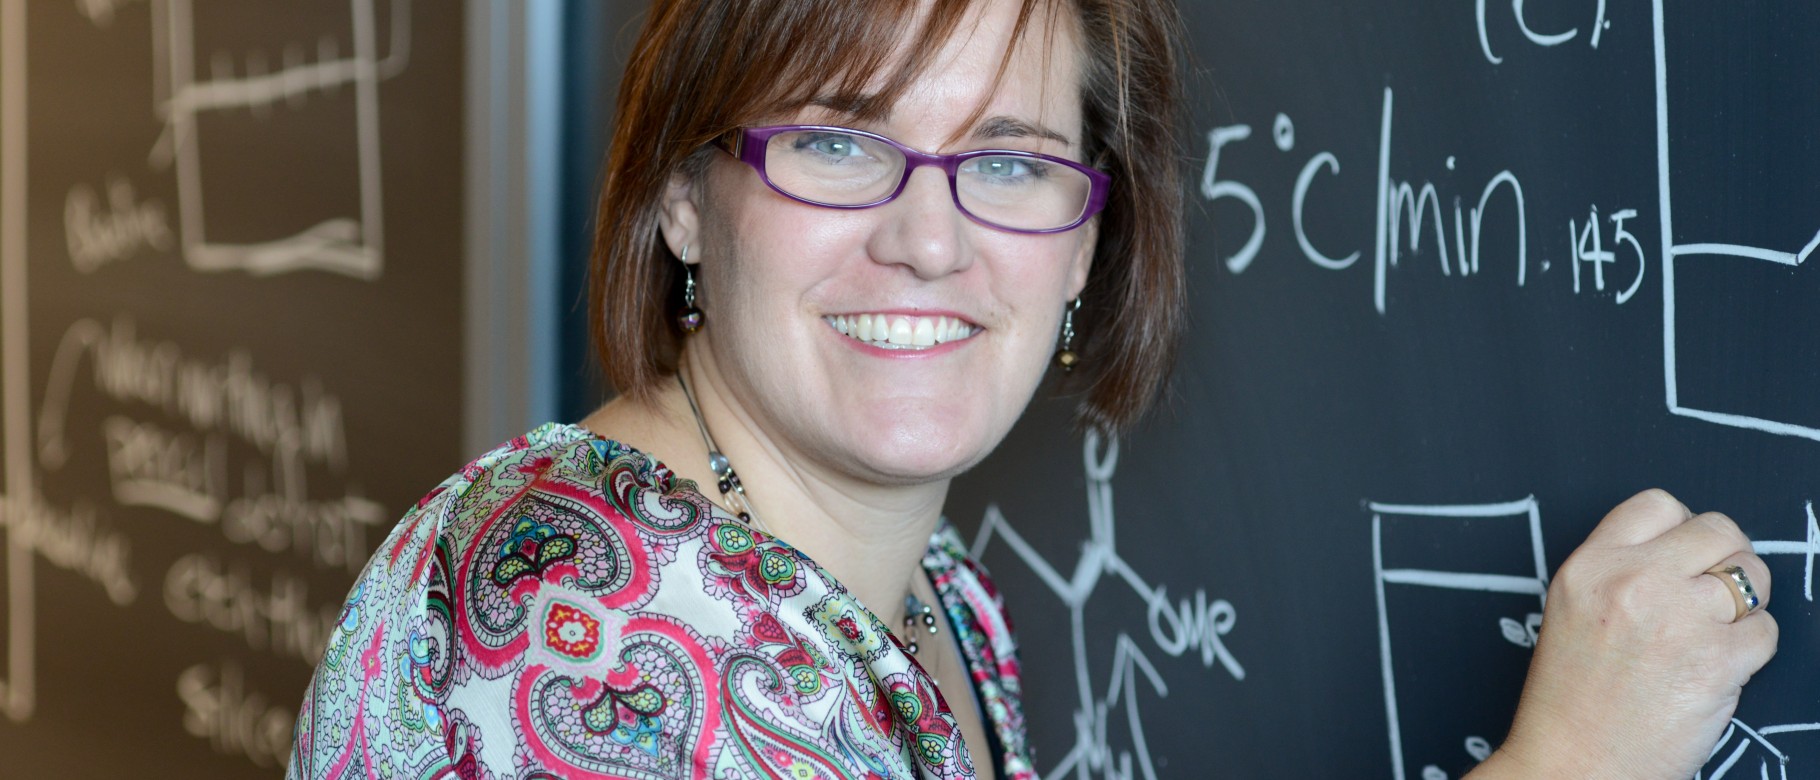 Amy Deveau, associate professor and assistant chair of the Department of Chemistry and Physics